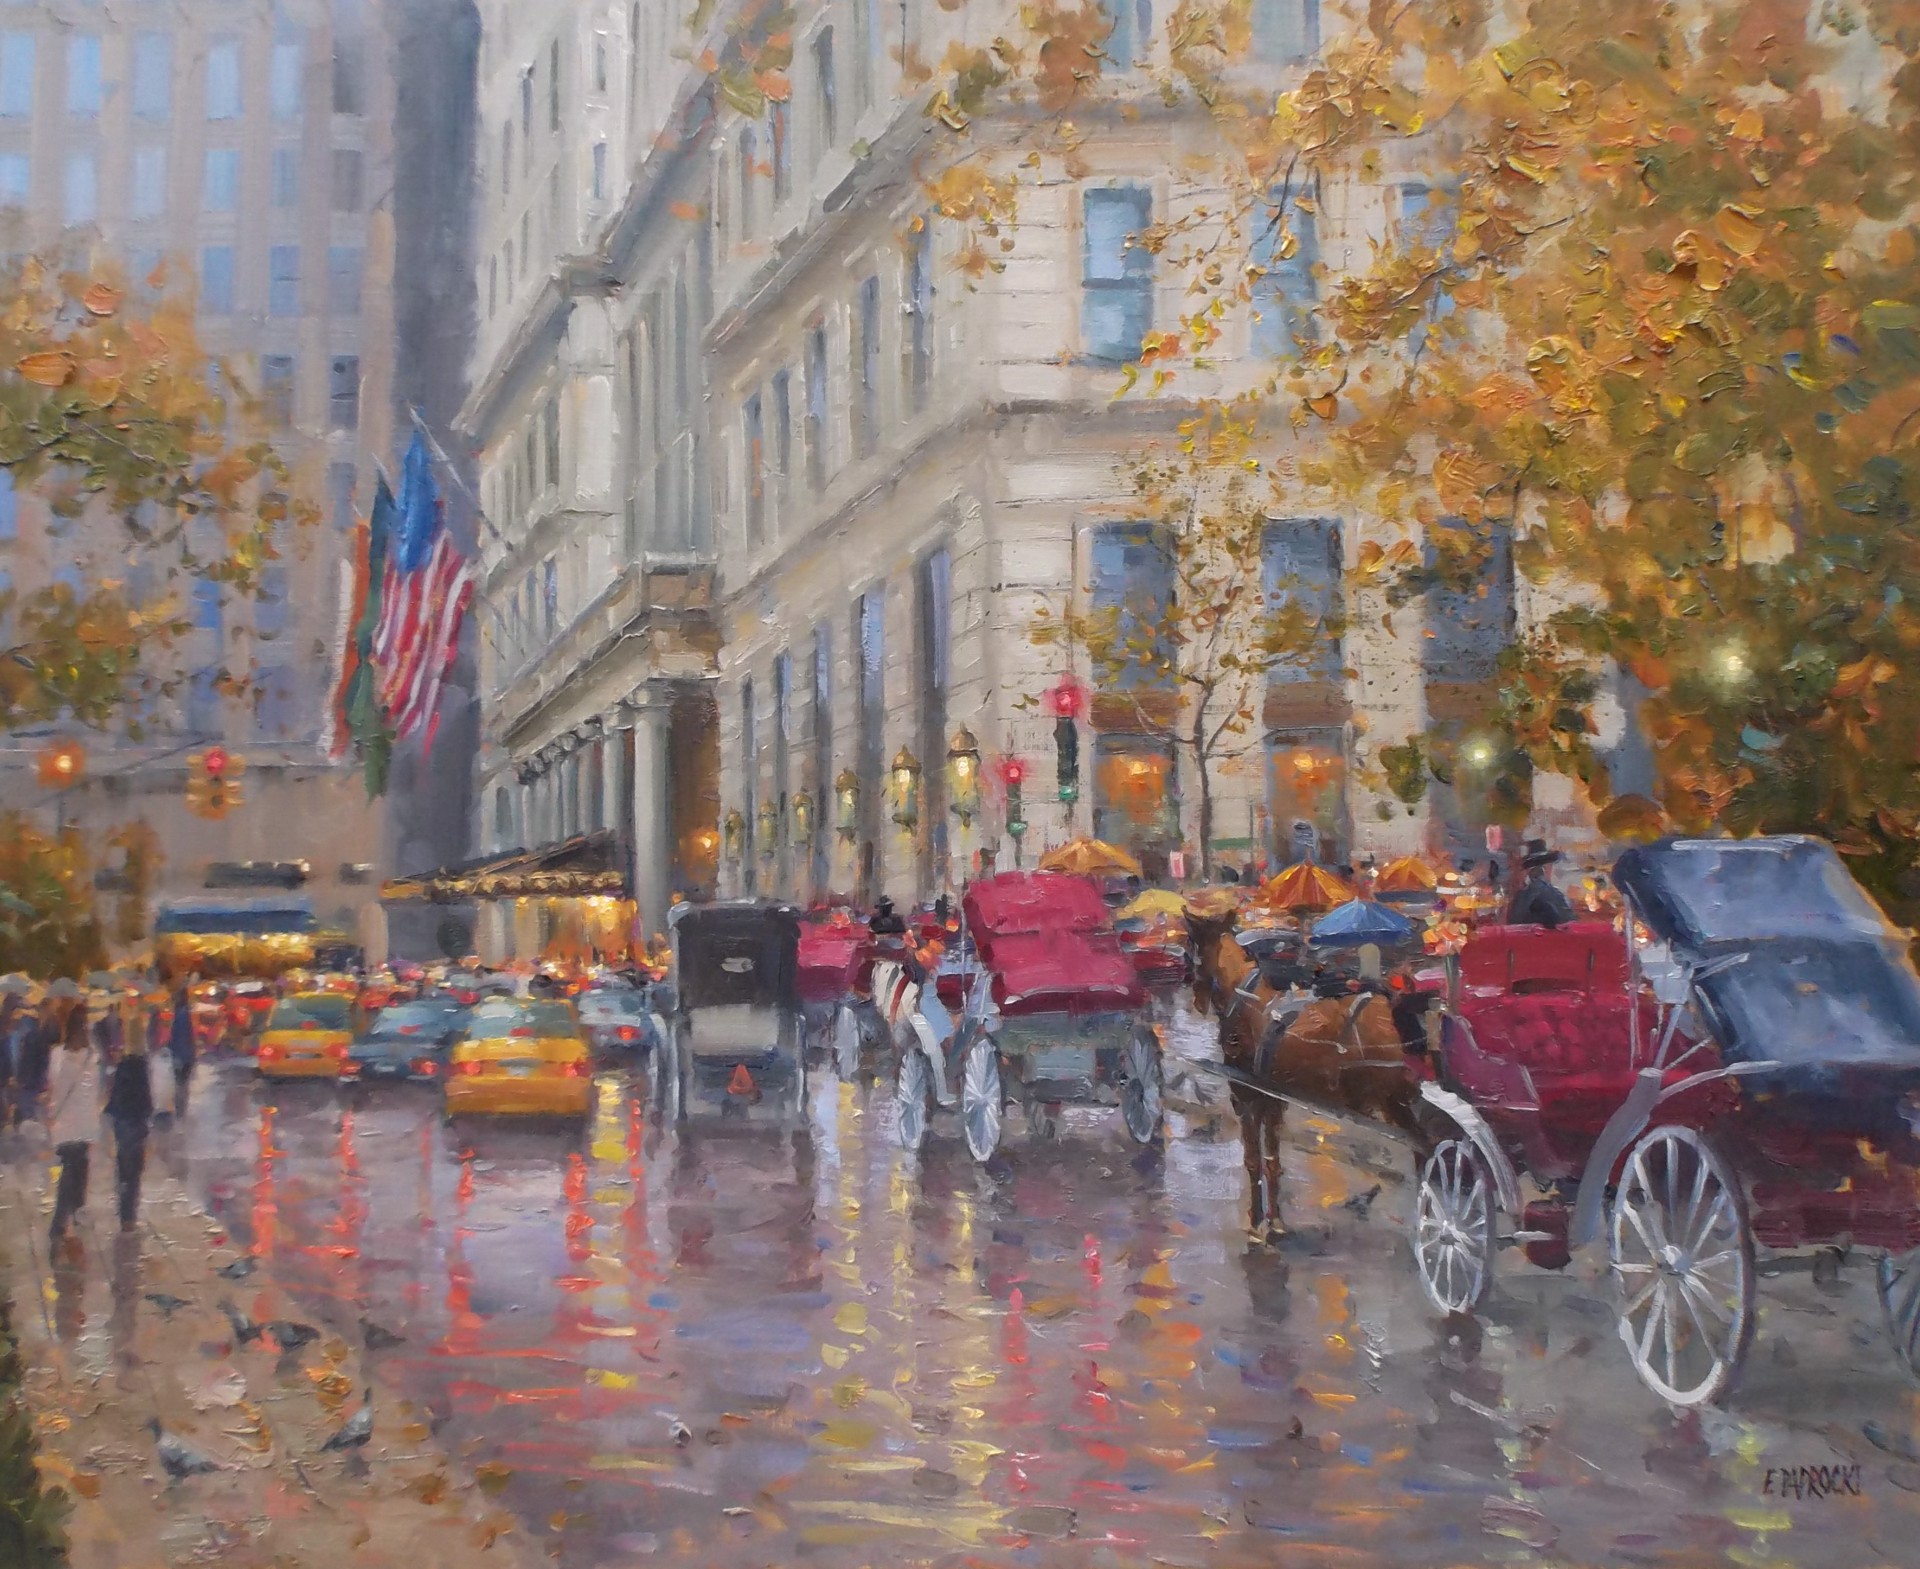 Saturday Afternoon in the Plaza by EJ Paprocki